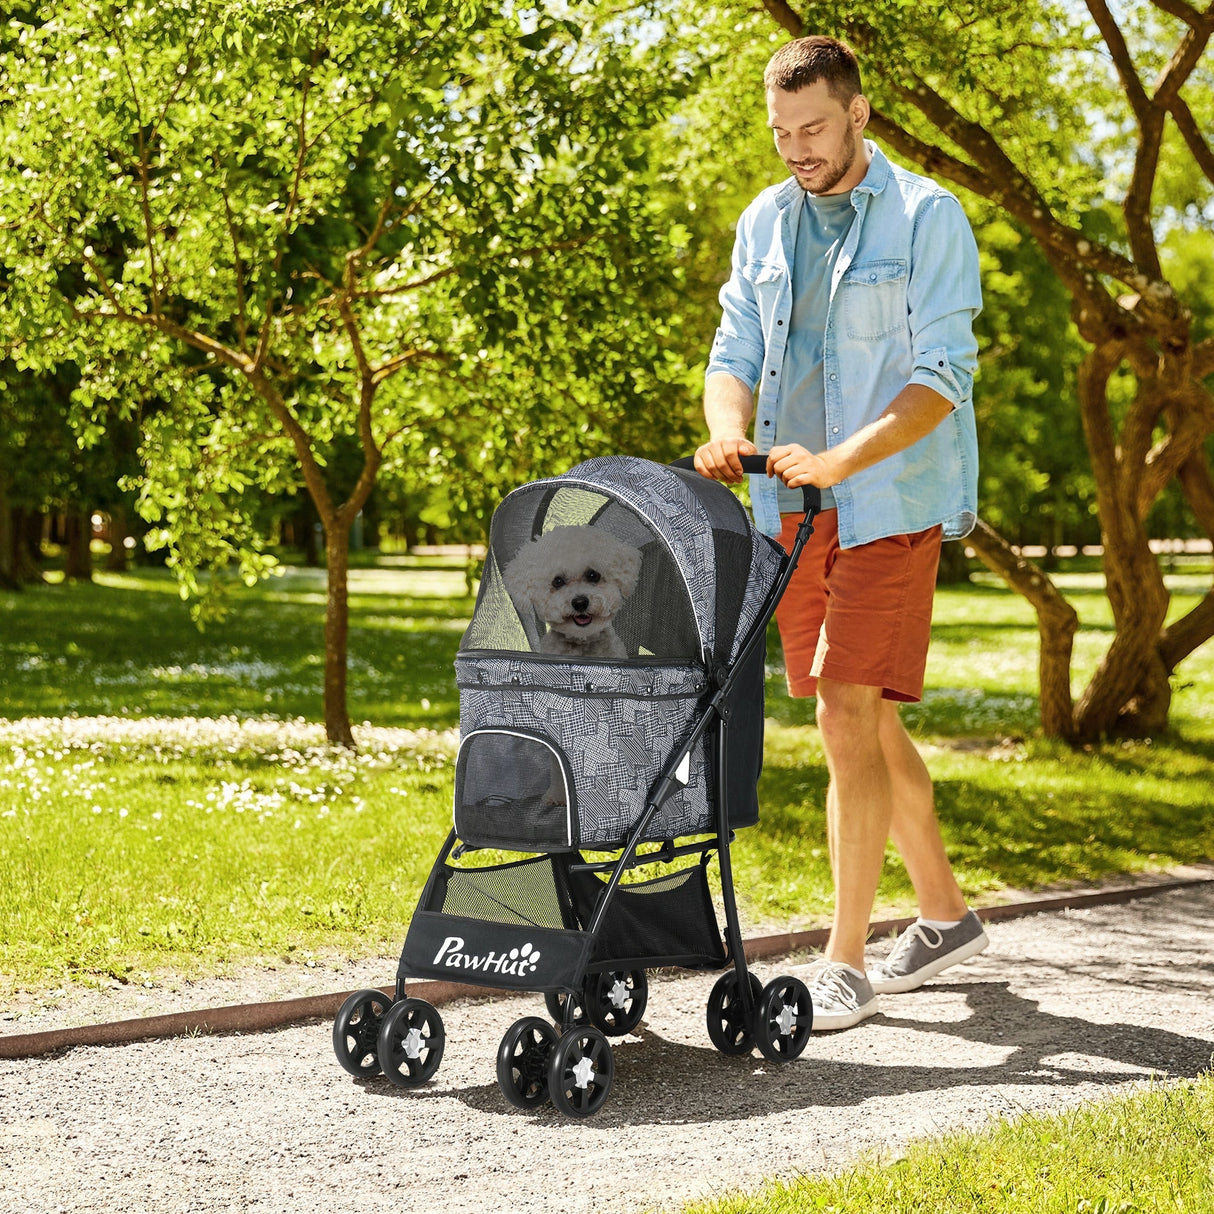 Compact Folding Pet Stroller - Large Carriage & Brakes for Small Sized Dogs, PawHut, Grey